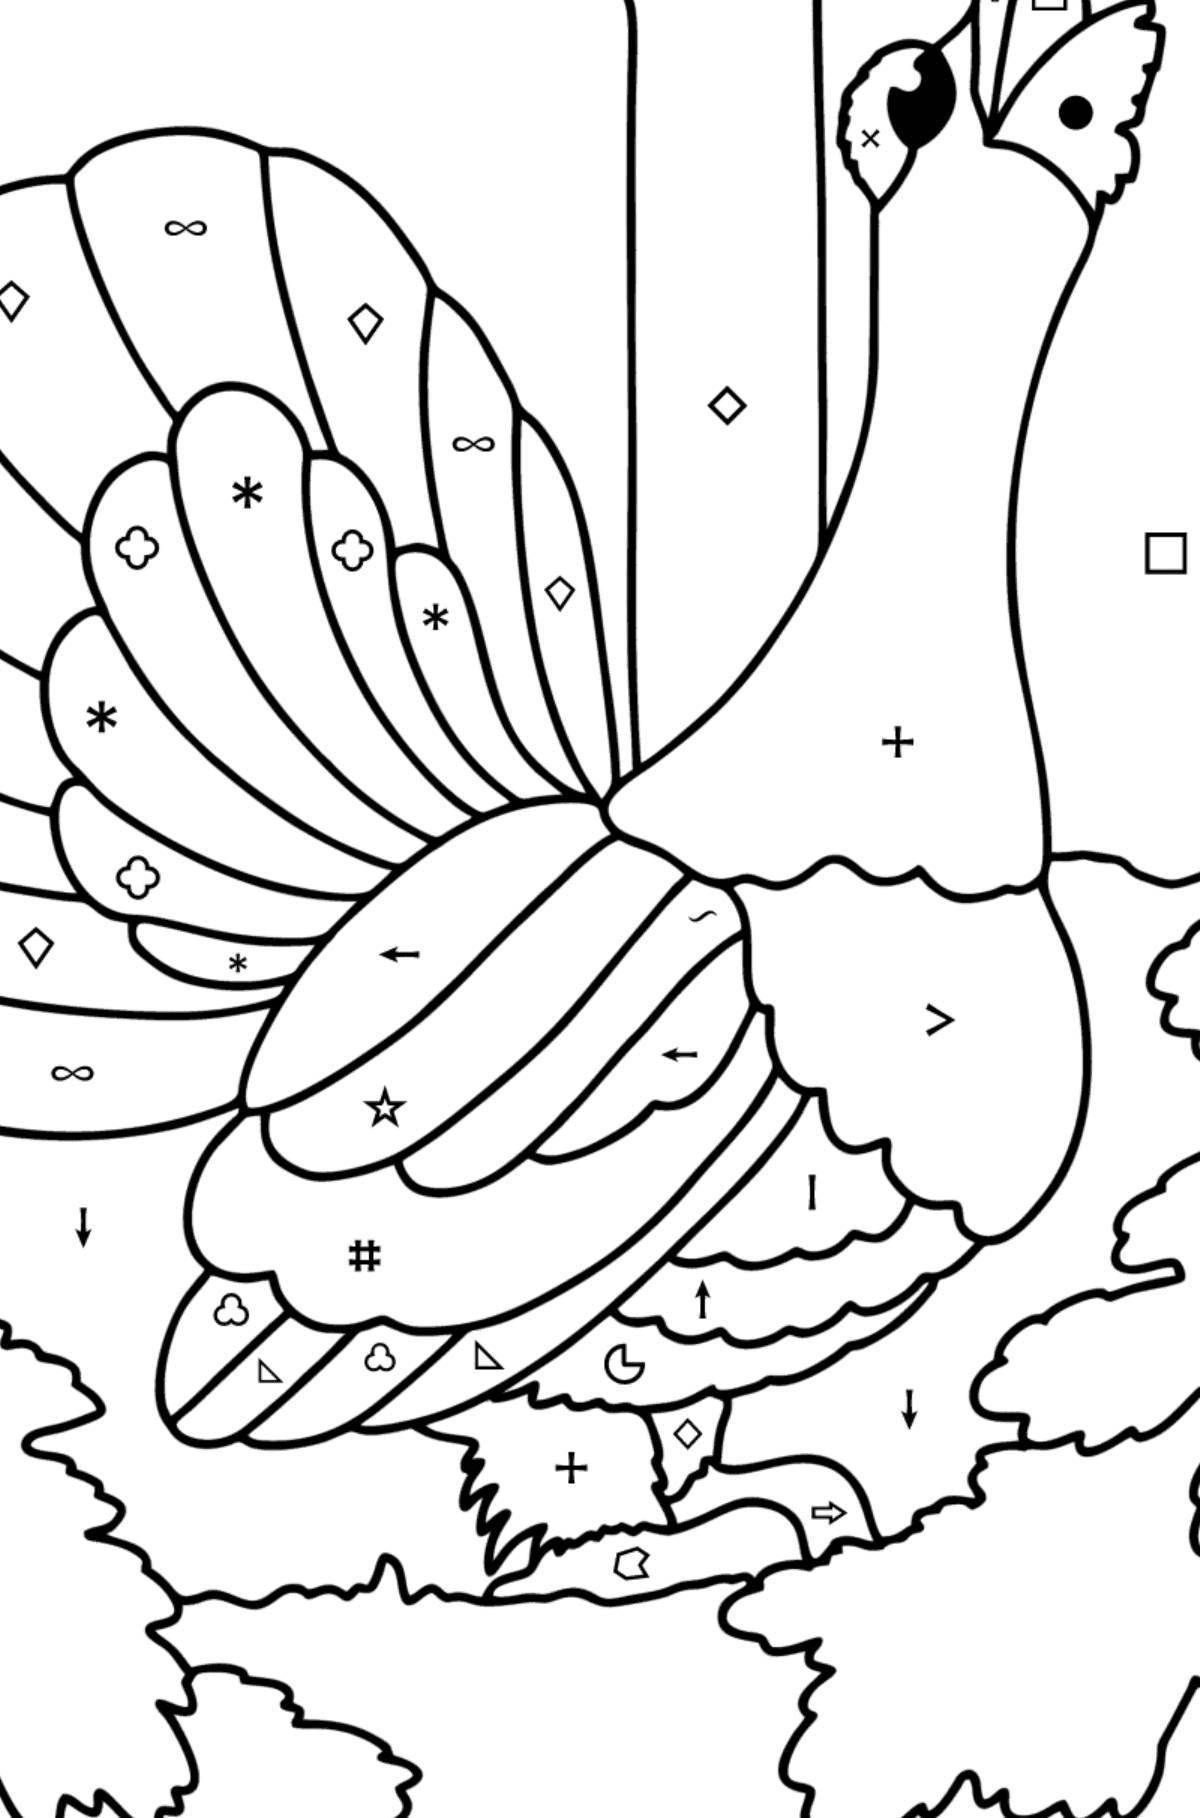 Coloring book playful capercaillie